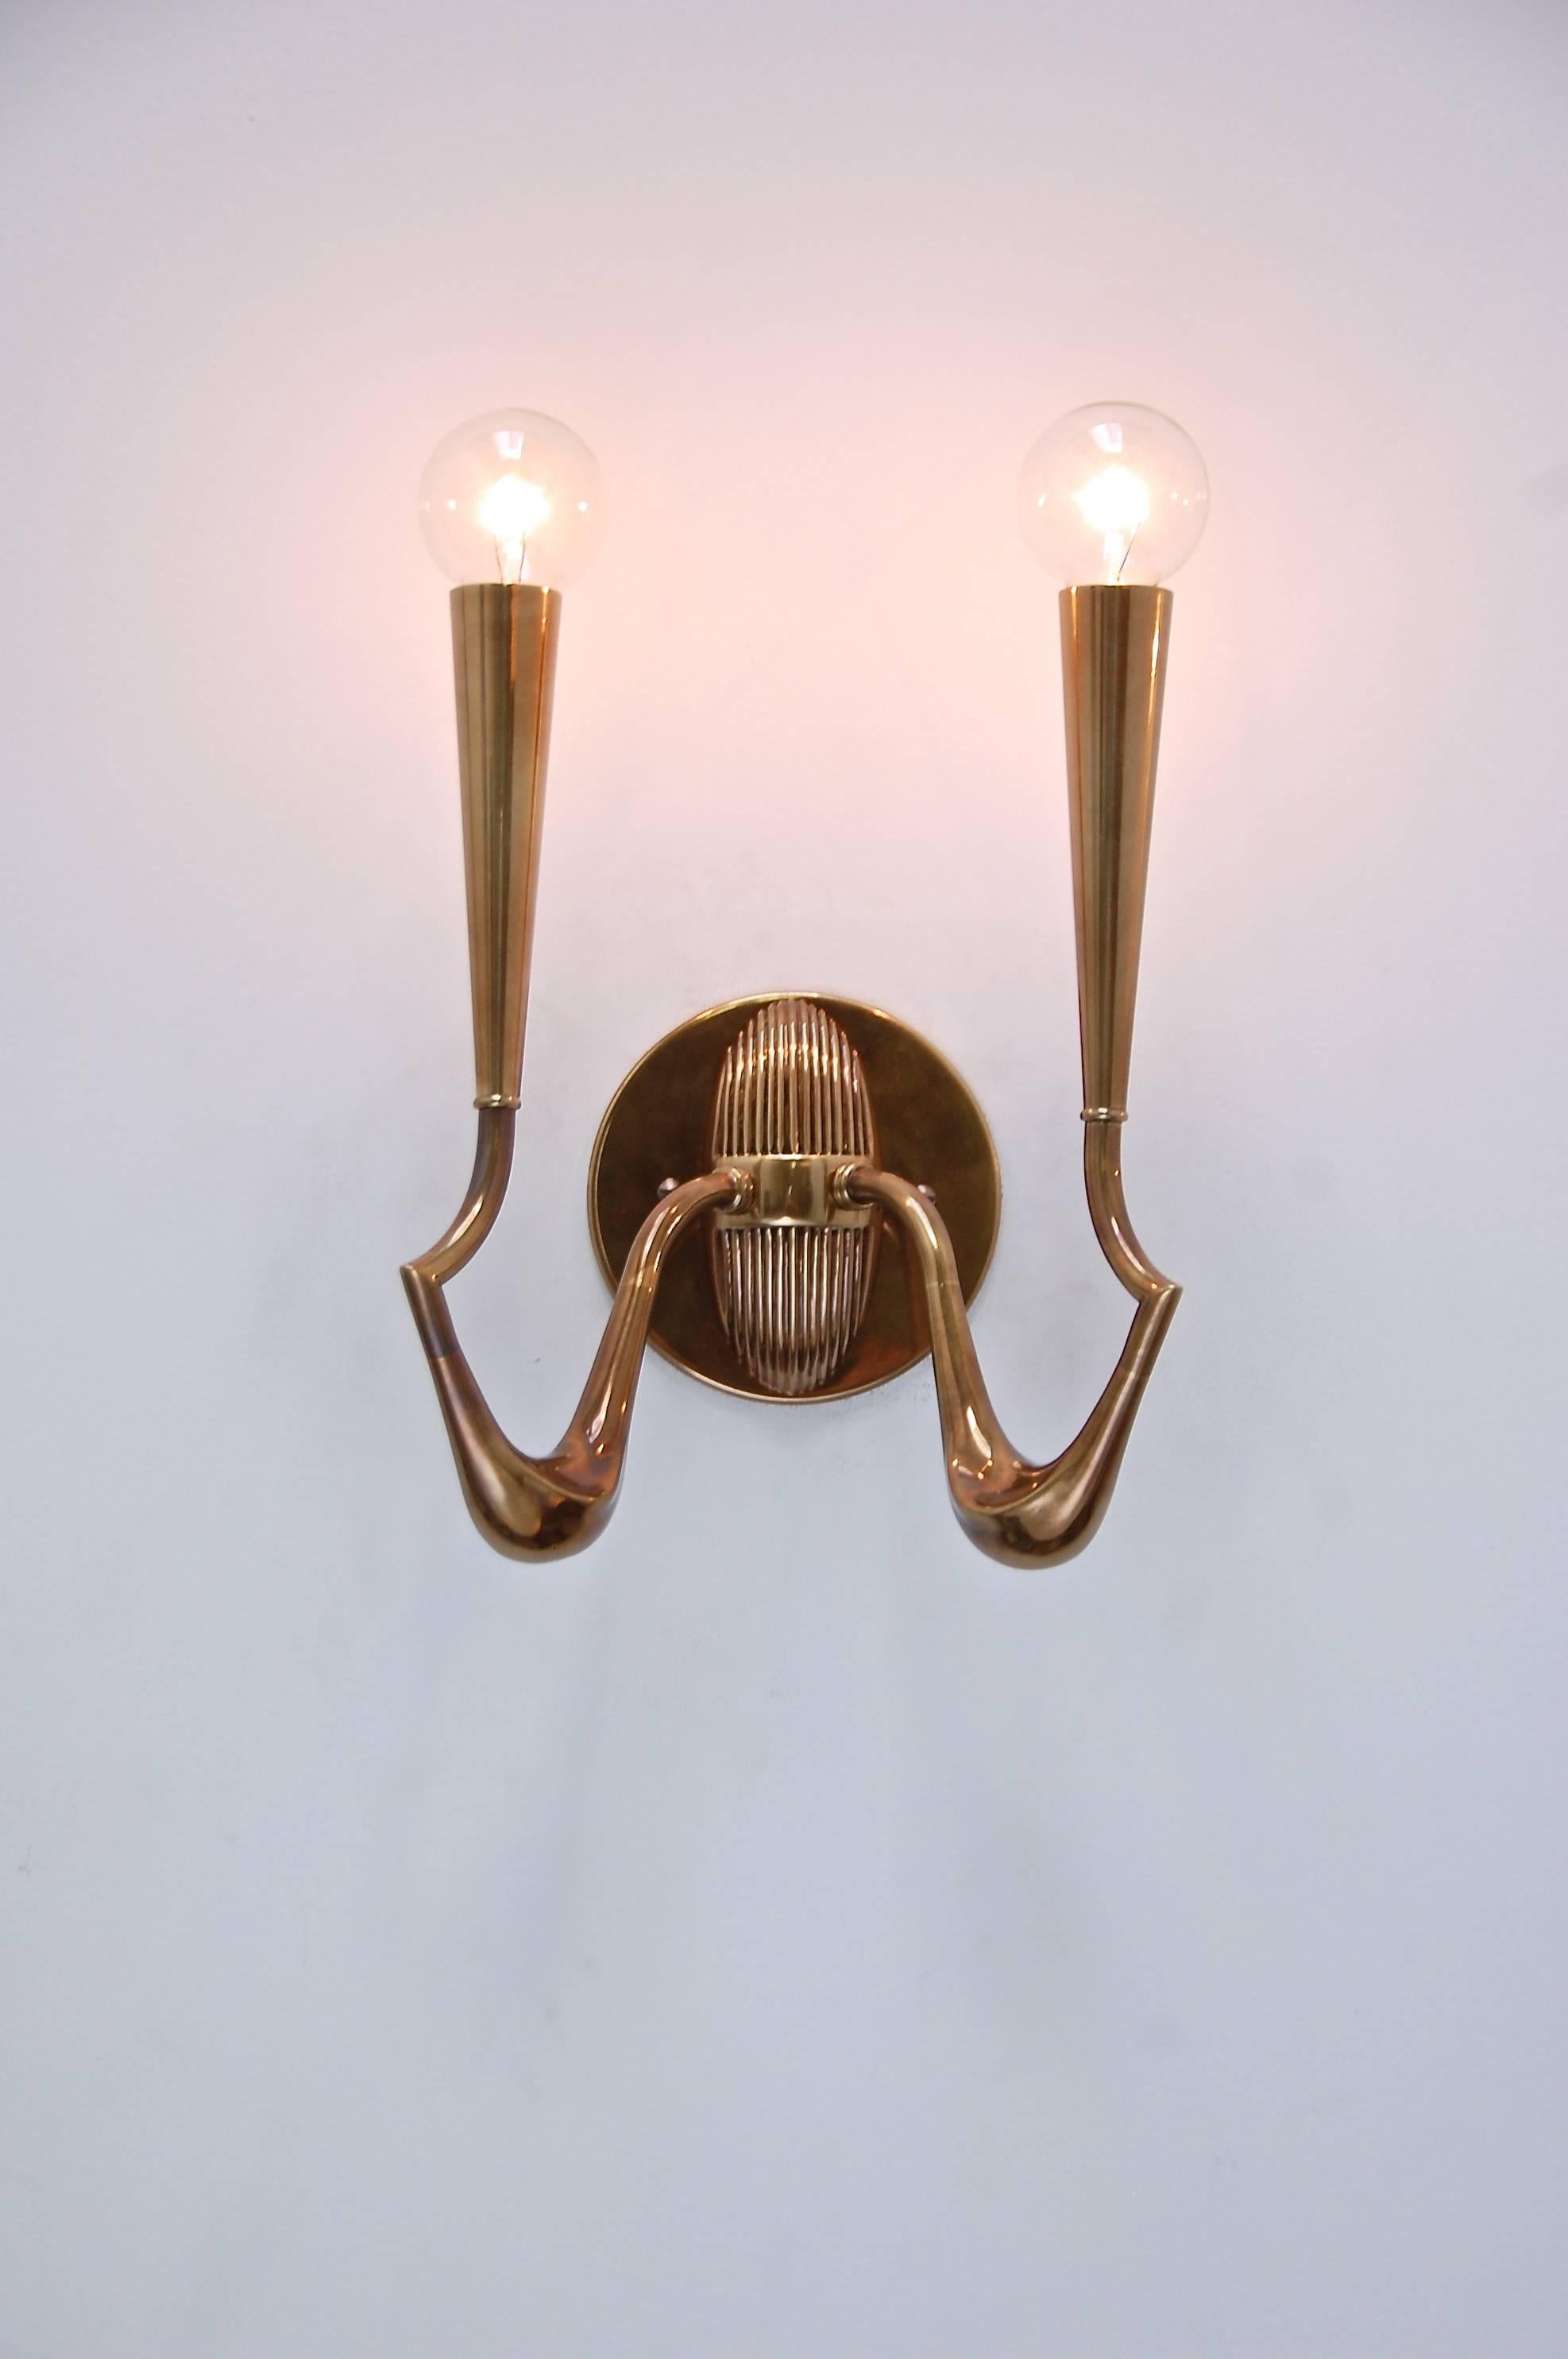 A pair of phenomenal solid brass Italian sconces reminiscent of Guglielmo Ulrich. They are rewired for use in the US. 
Candelabra based sockets.
Measurements are with featured light bulbs.